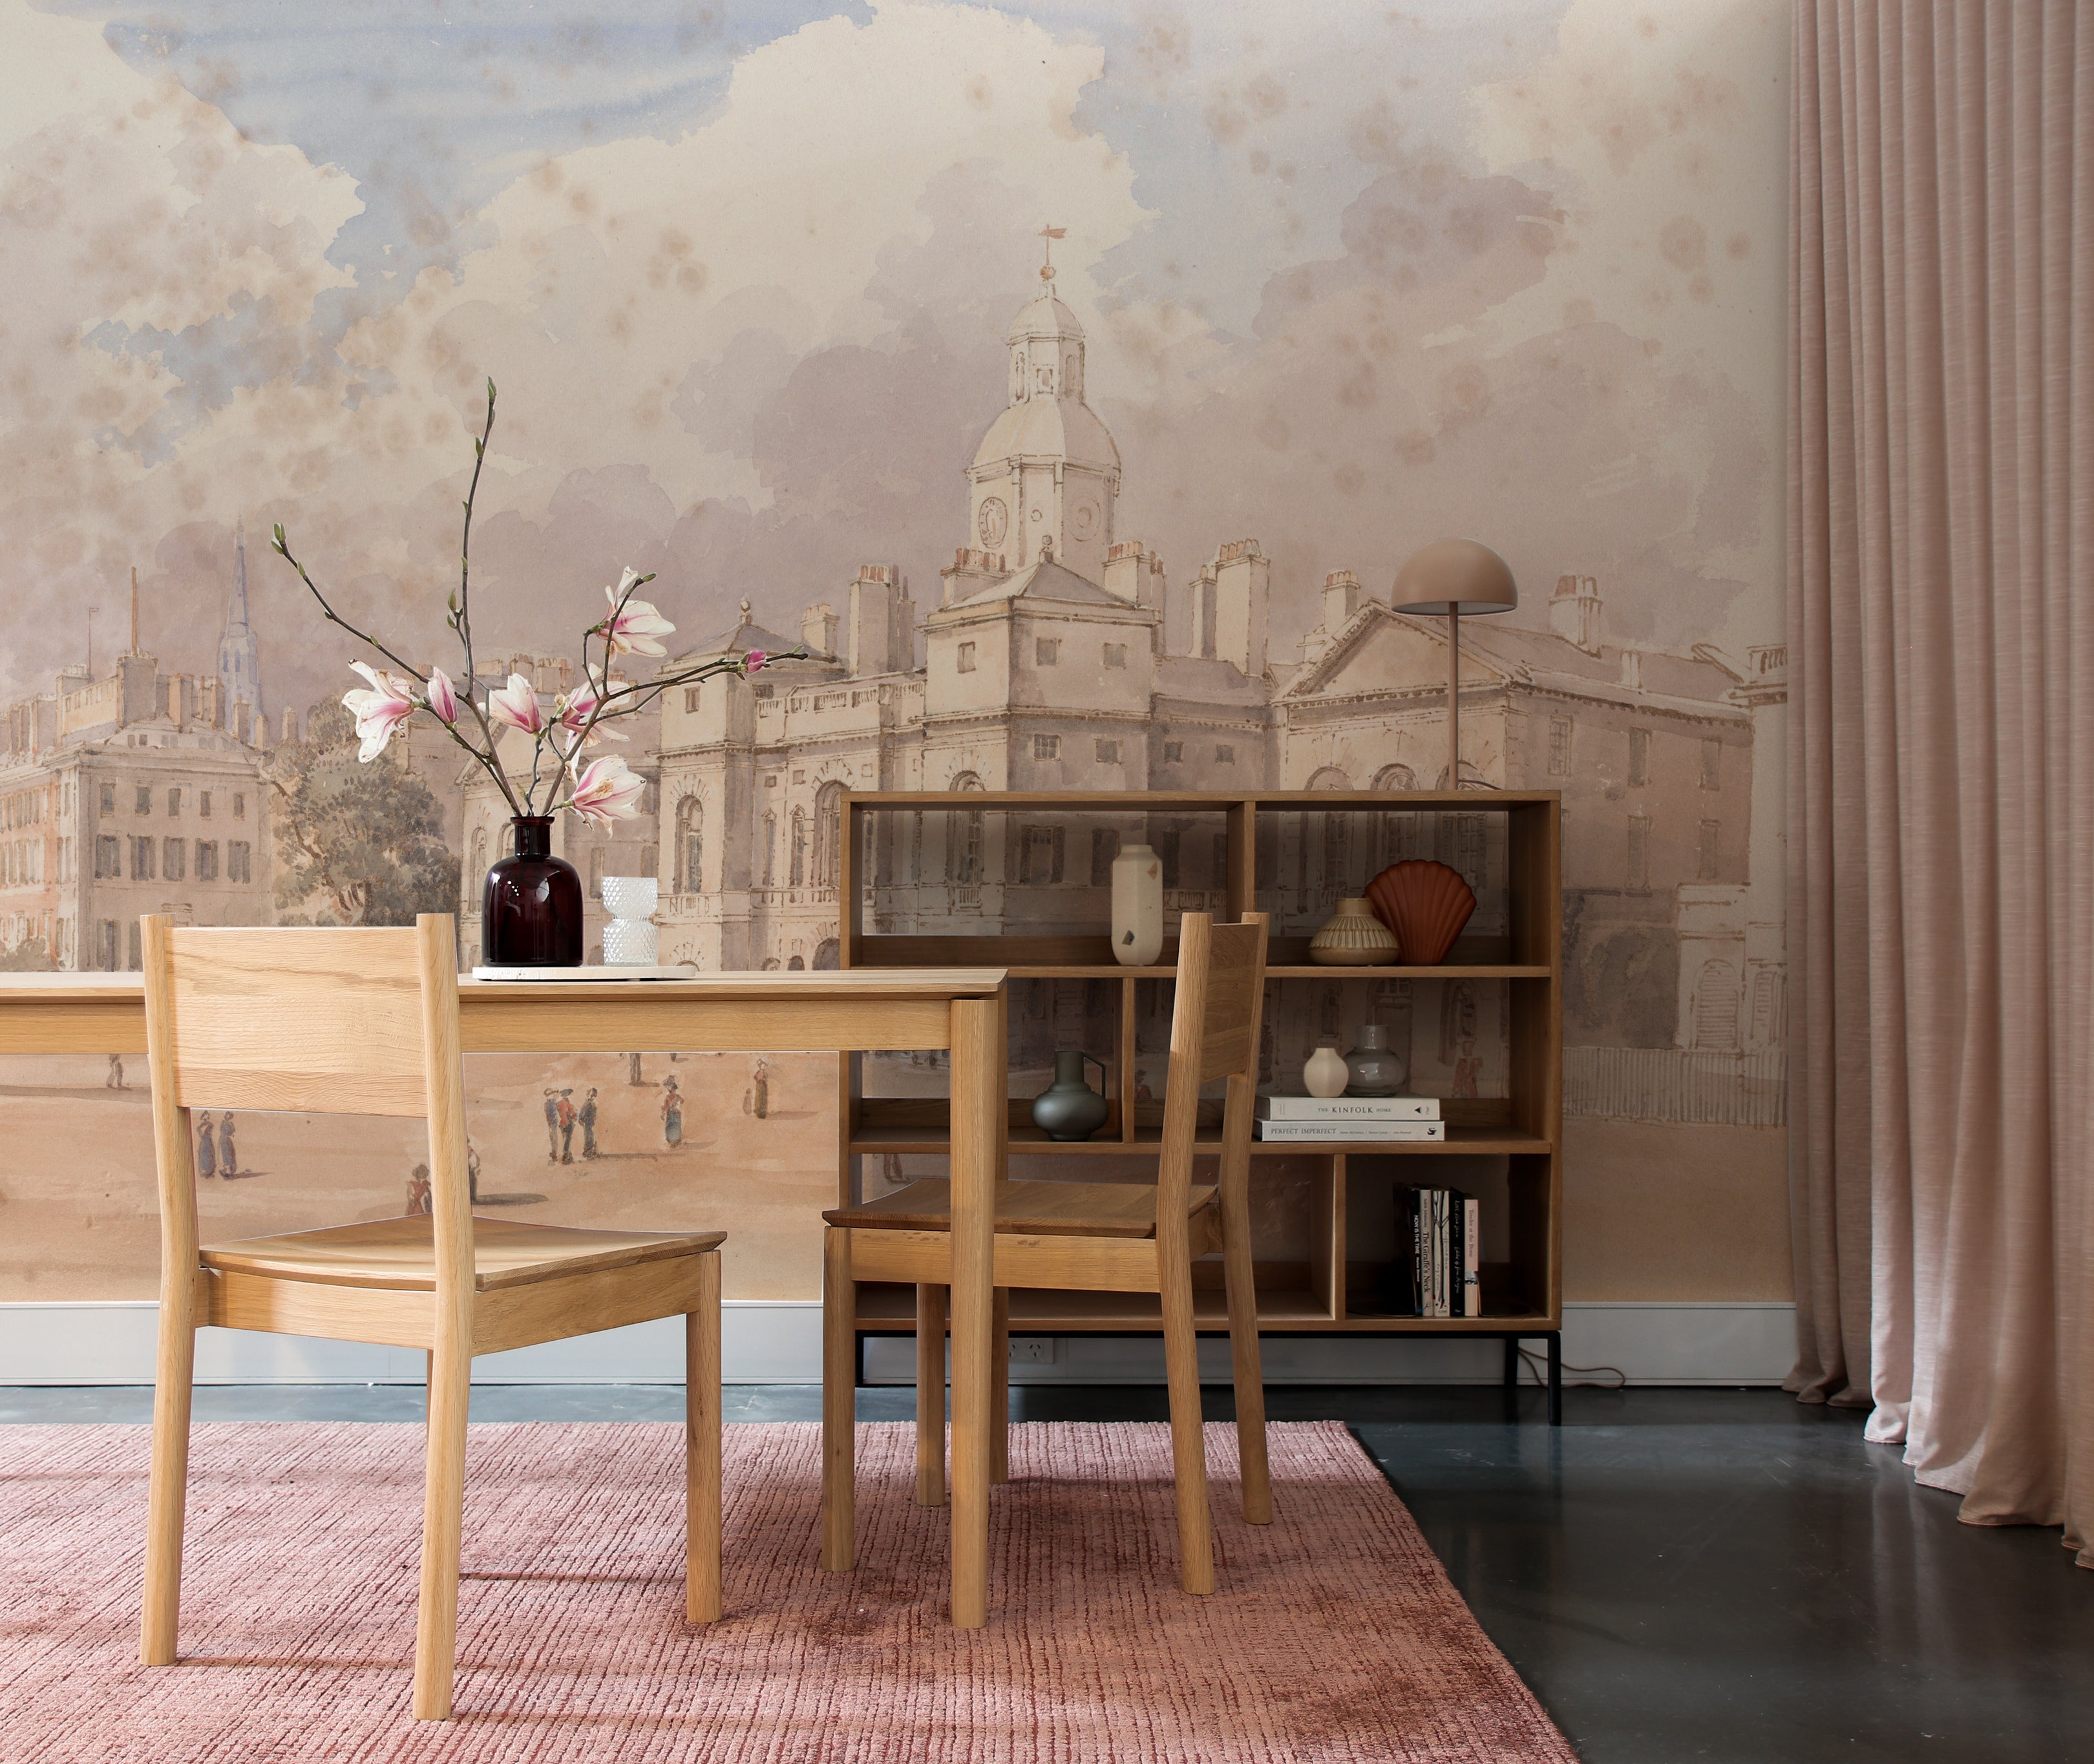 A sophisticated dining room displaying the "Parade" wallpaper mural depicting a historic cityscape with intricate architectural details. A wooden table, matching chairs, and a vase with pink blossoms enhance the room's warmth.